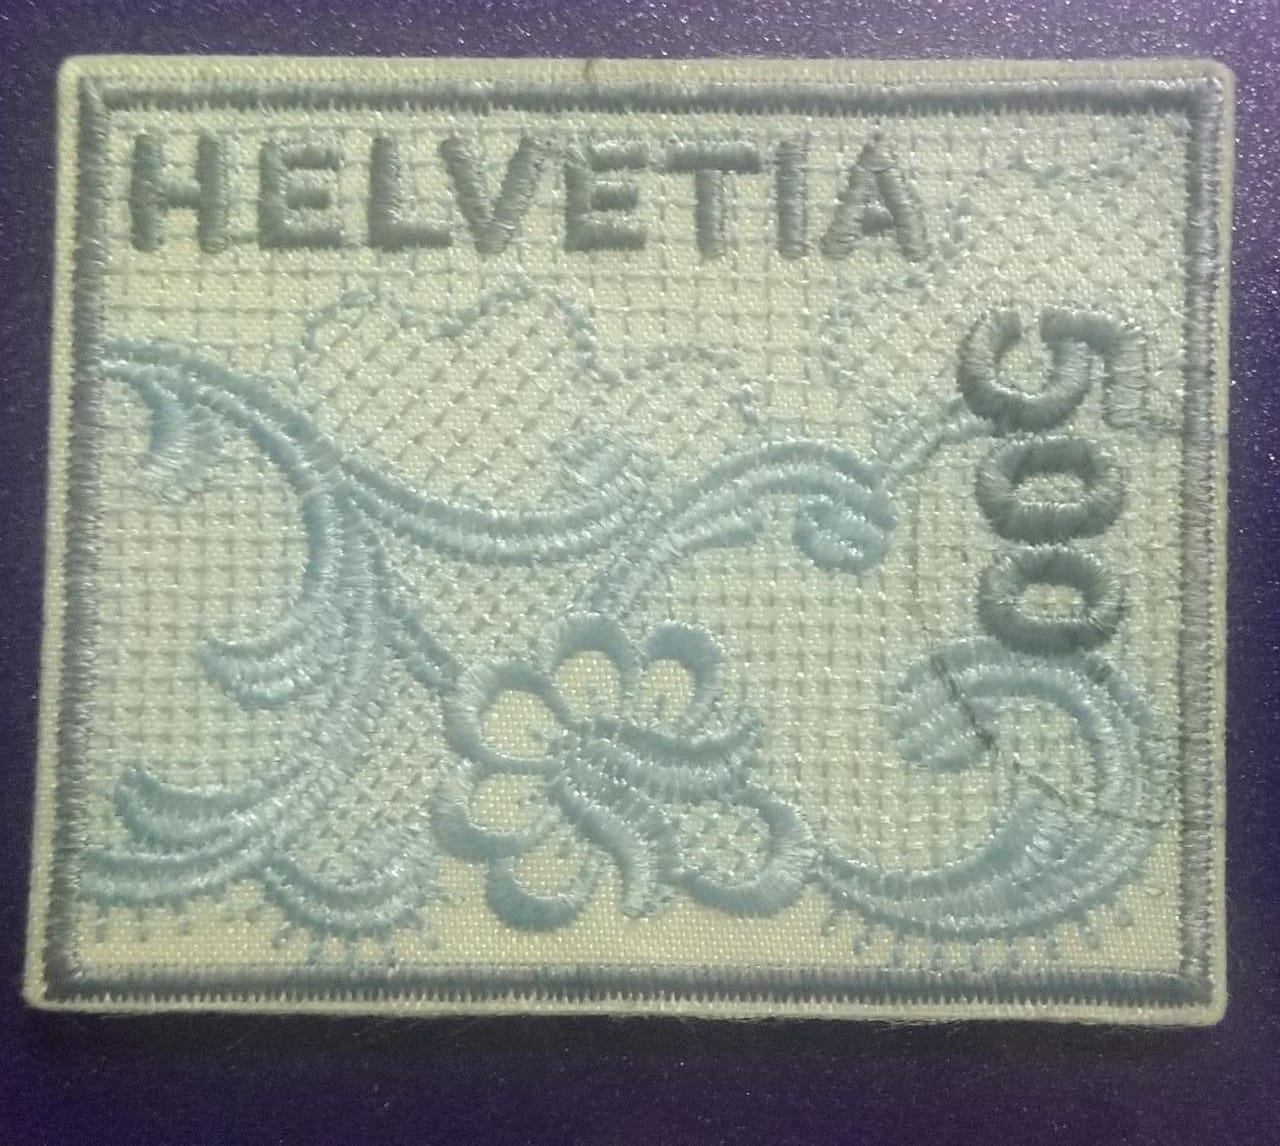 Swiss beautiful Embroidery Used stamp.